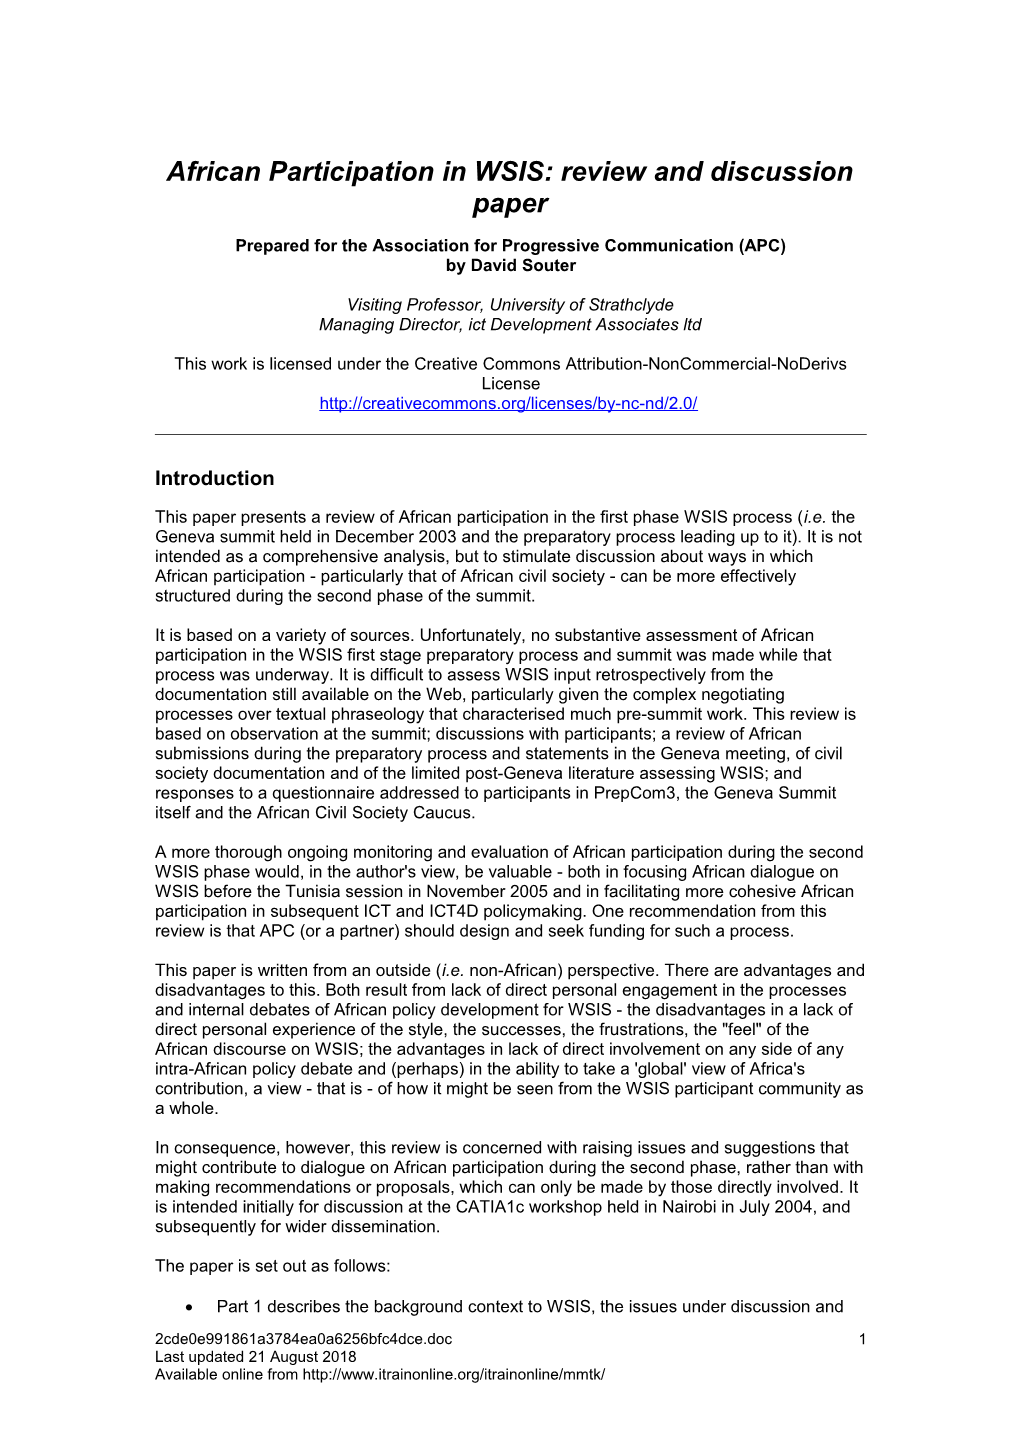 African Participation in WSIS: Review and Discussion Paper